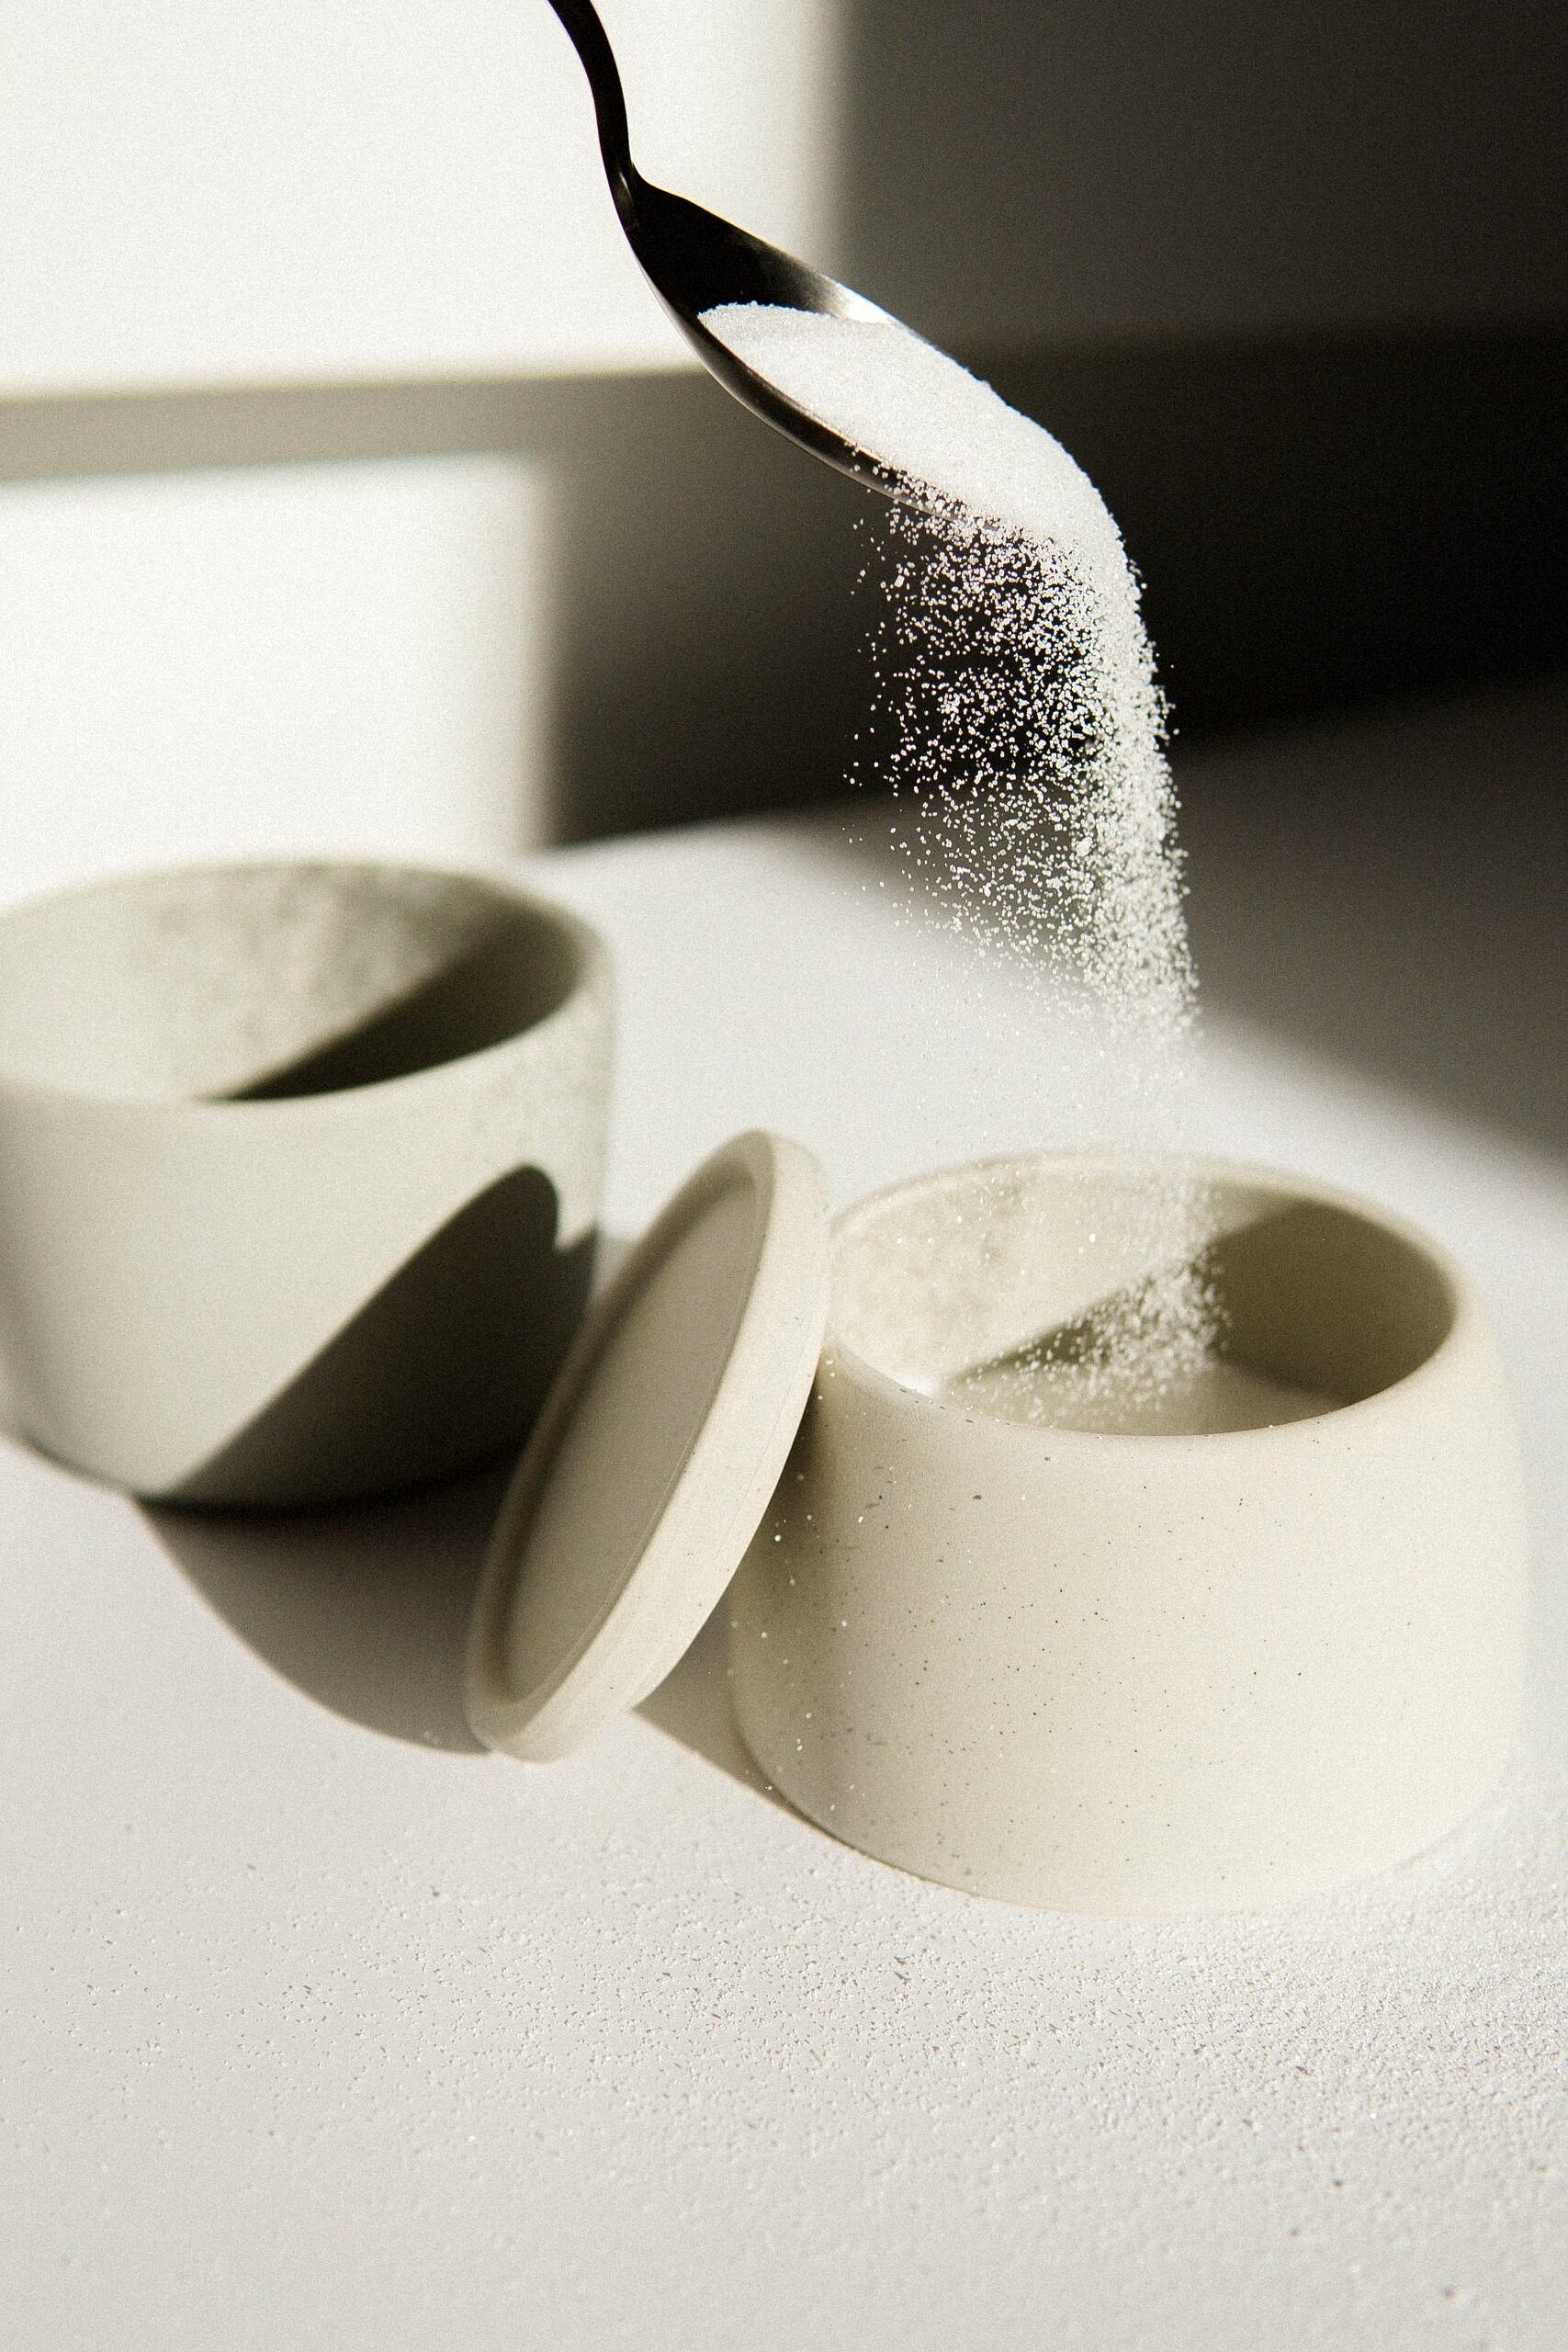 Sugar in being poured into a bowl.